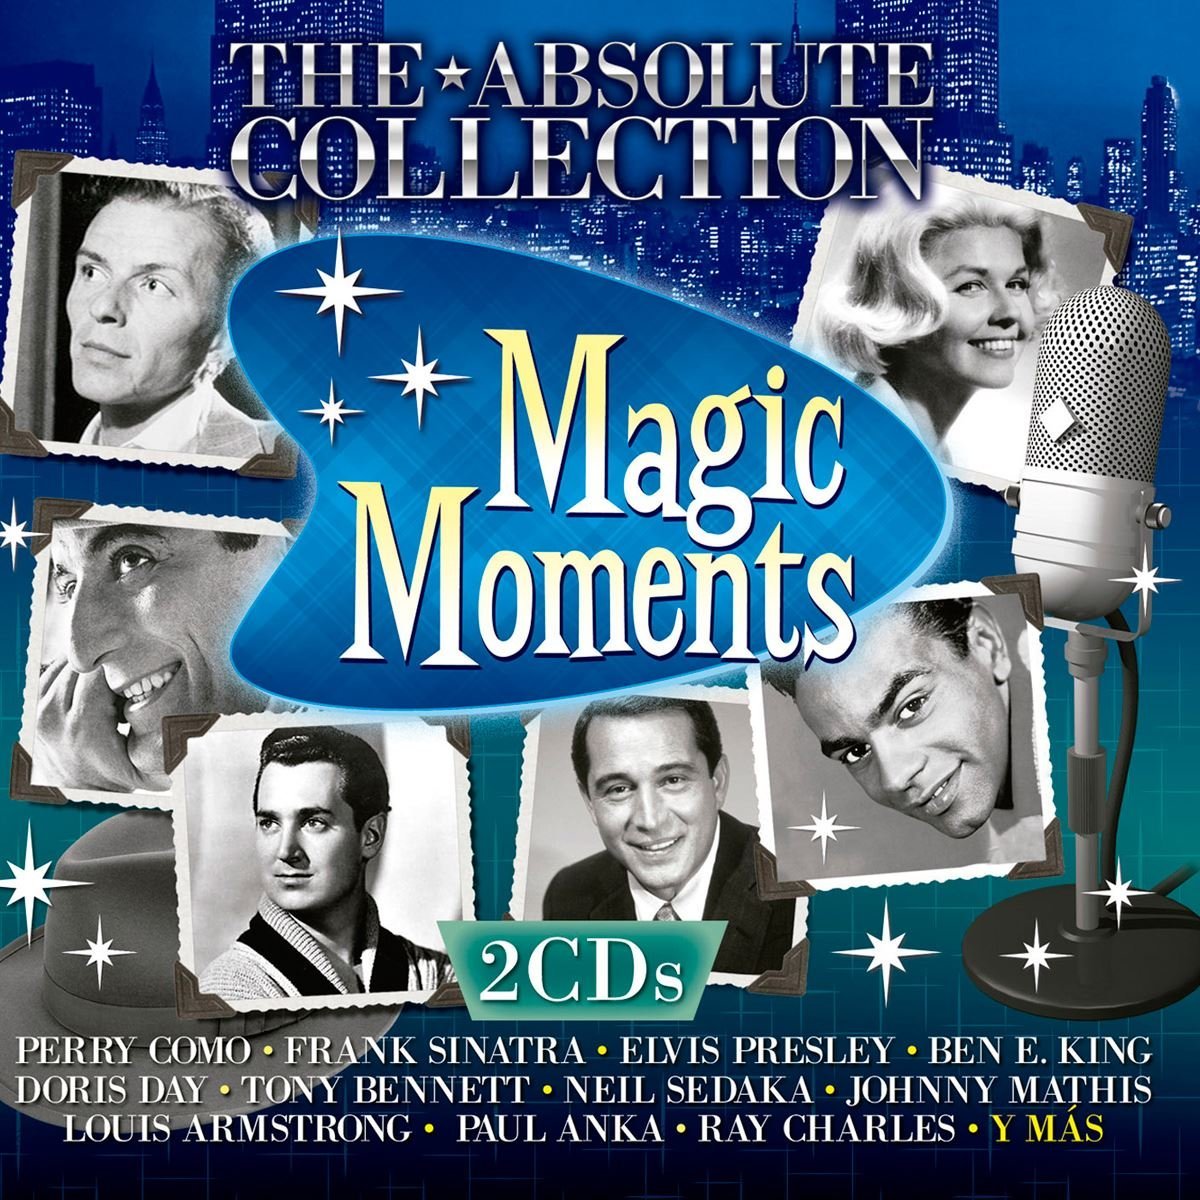 2Cds The Absolute Collection - Magic Moments